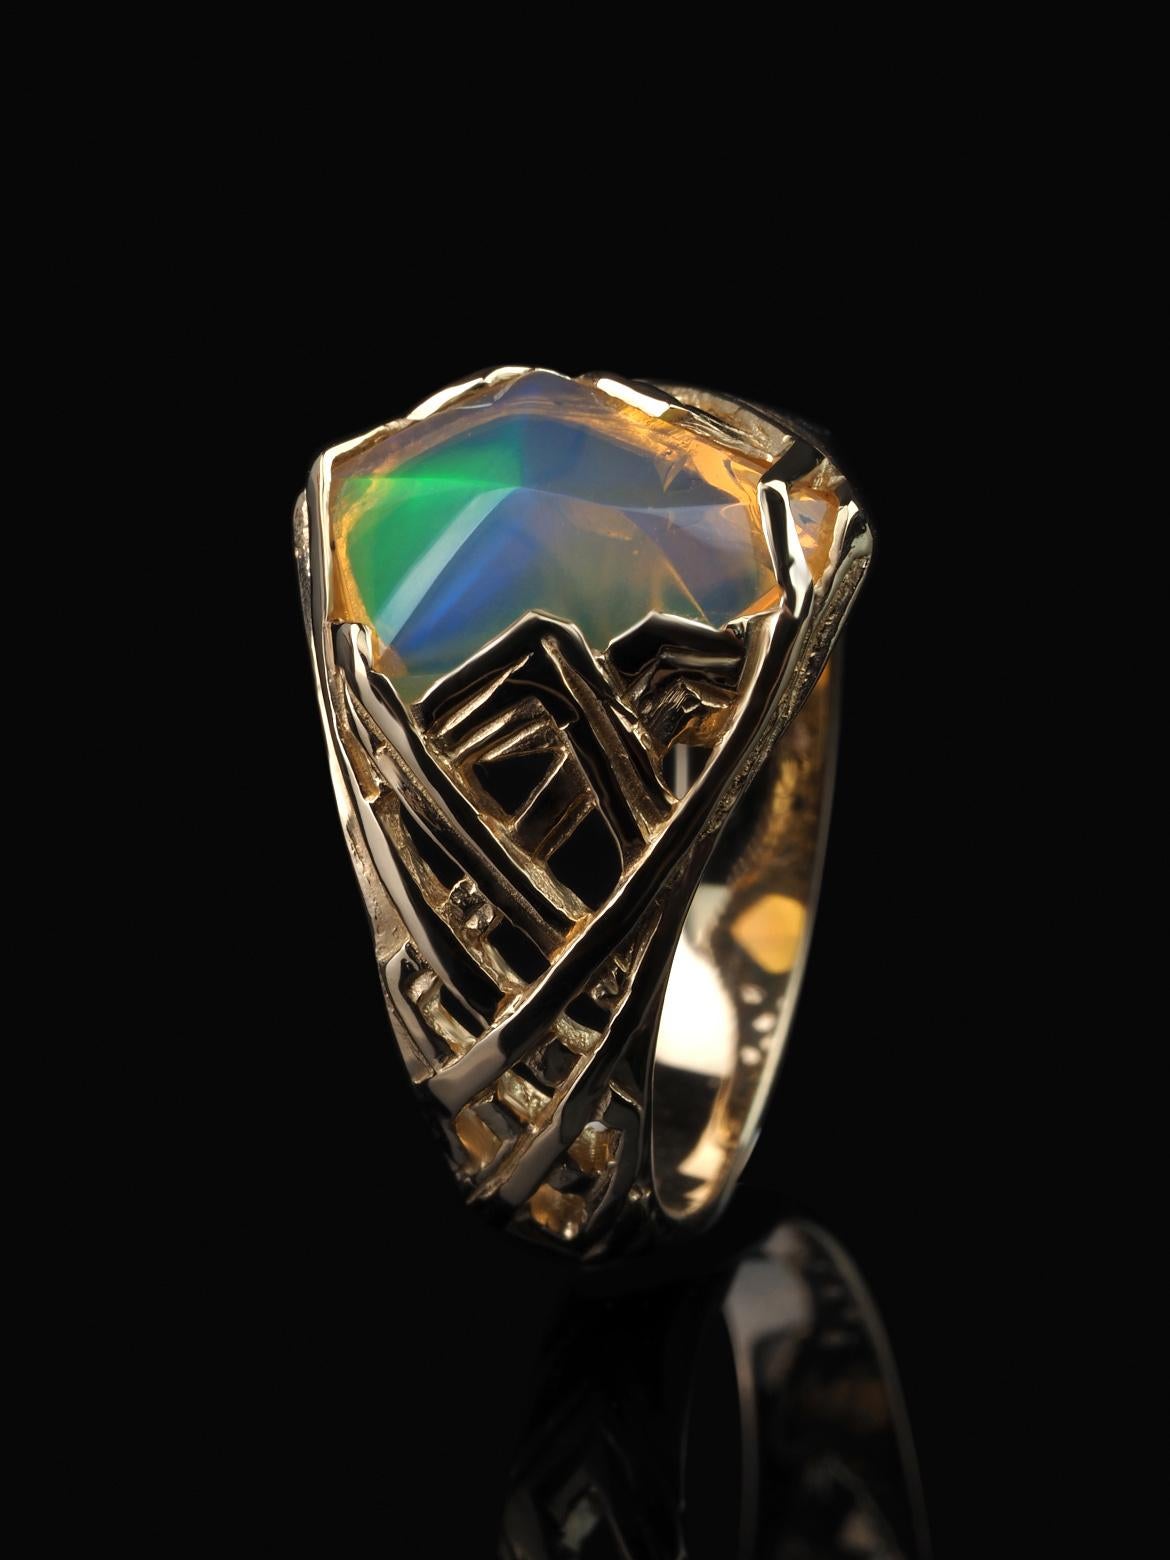 14k yellow gold ring with natural Opal
opal origin - Ethiopia  
opal measurements - 0.16 х 0.35 х 0.43 in / 4 х 9 х 11 mm
opal weight - 1.52 carats
ring size - 6.5 US
ring weight - 4.26 grams


We ship our jewelry worldwide – for our customers it is